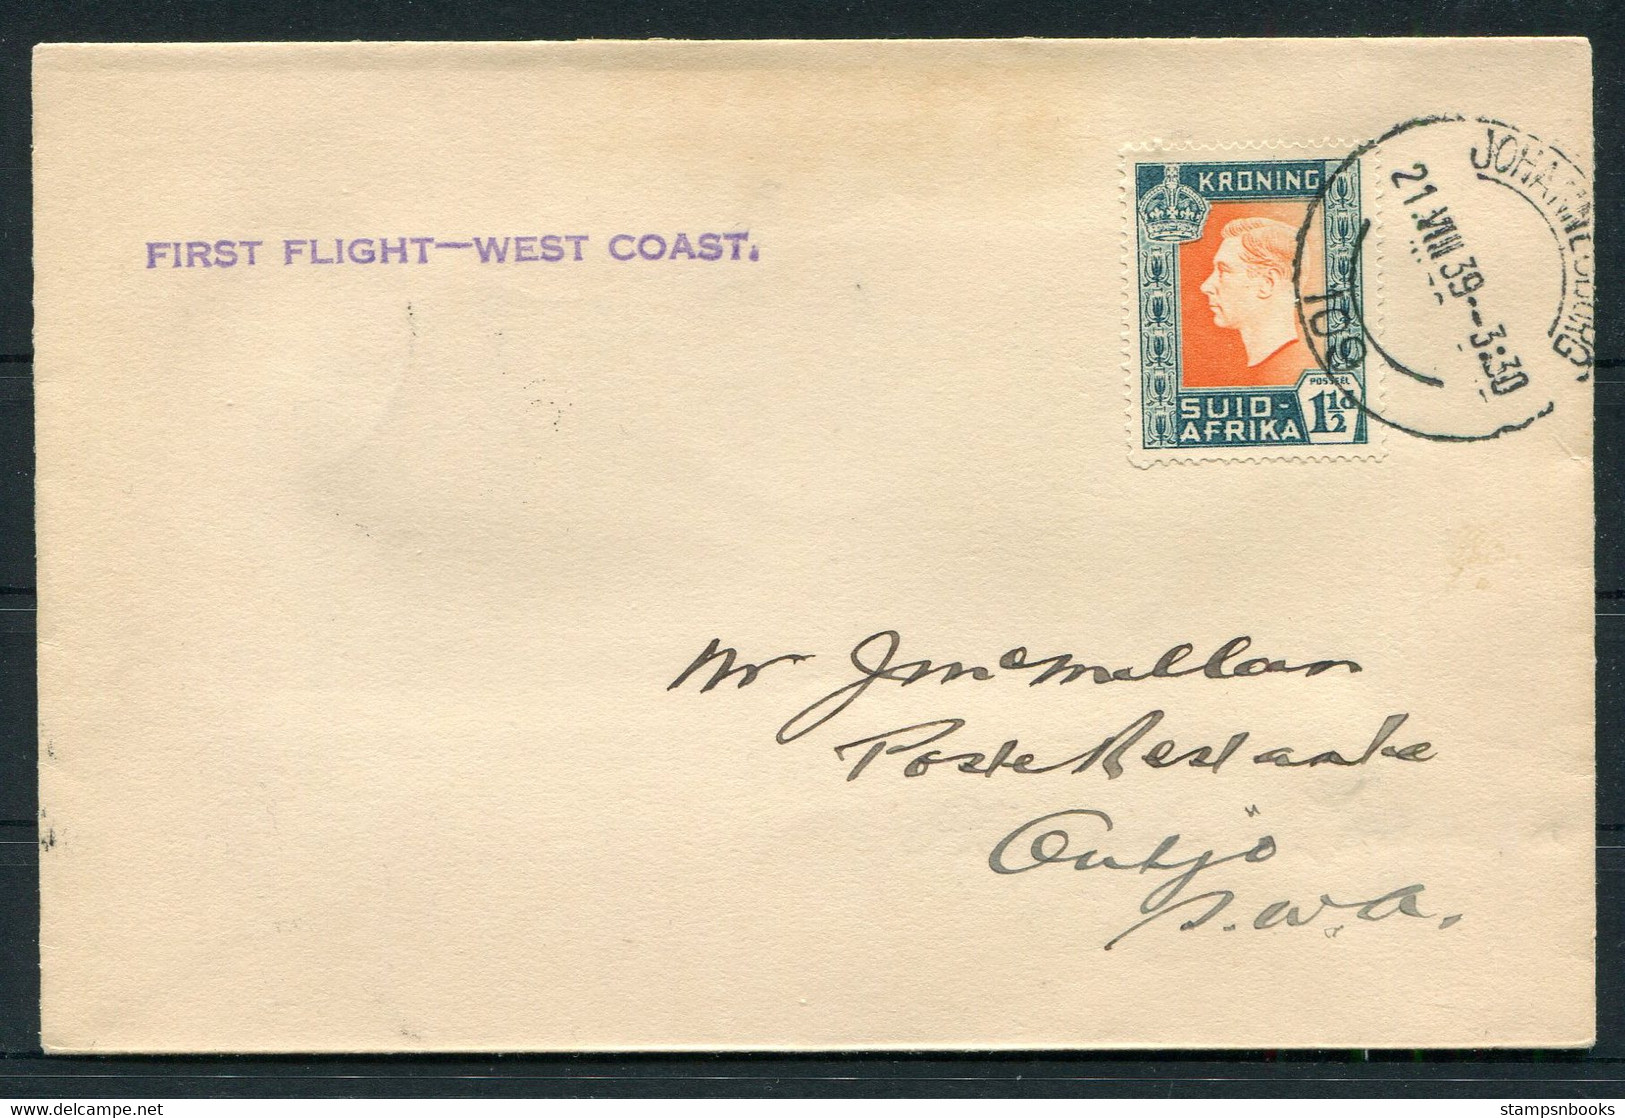 1939 (21st August) South Africa, West Coast Route First Flight Cover. Johannesburg - Outjo S.W.A. - Luchtpost